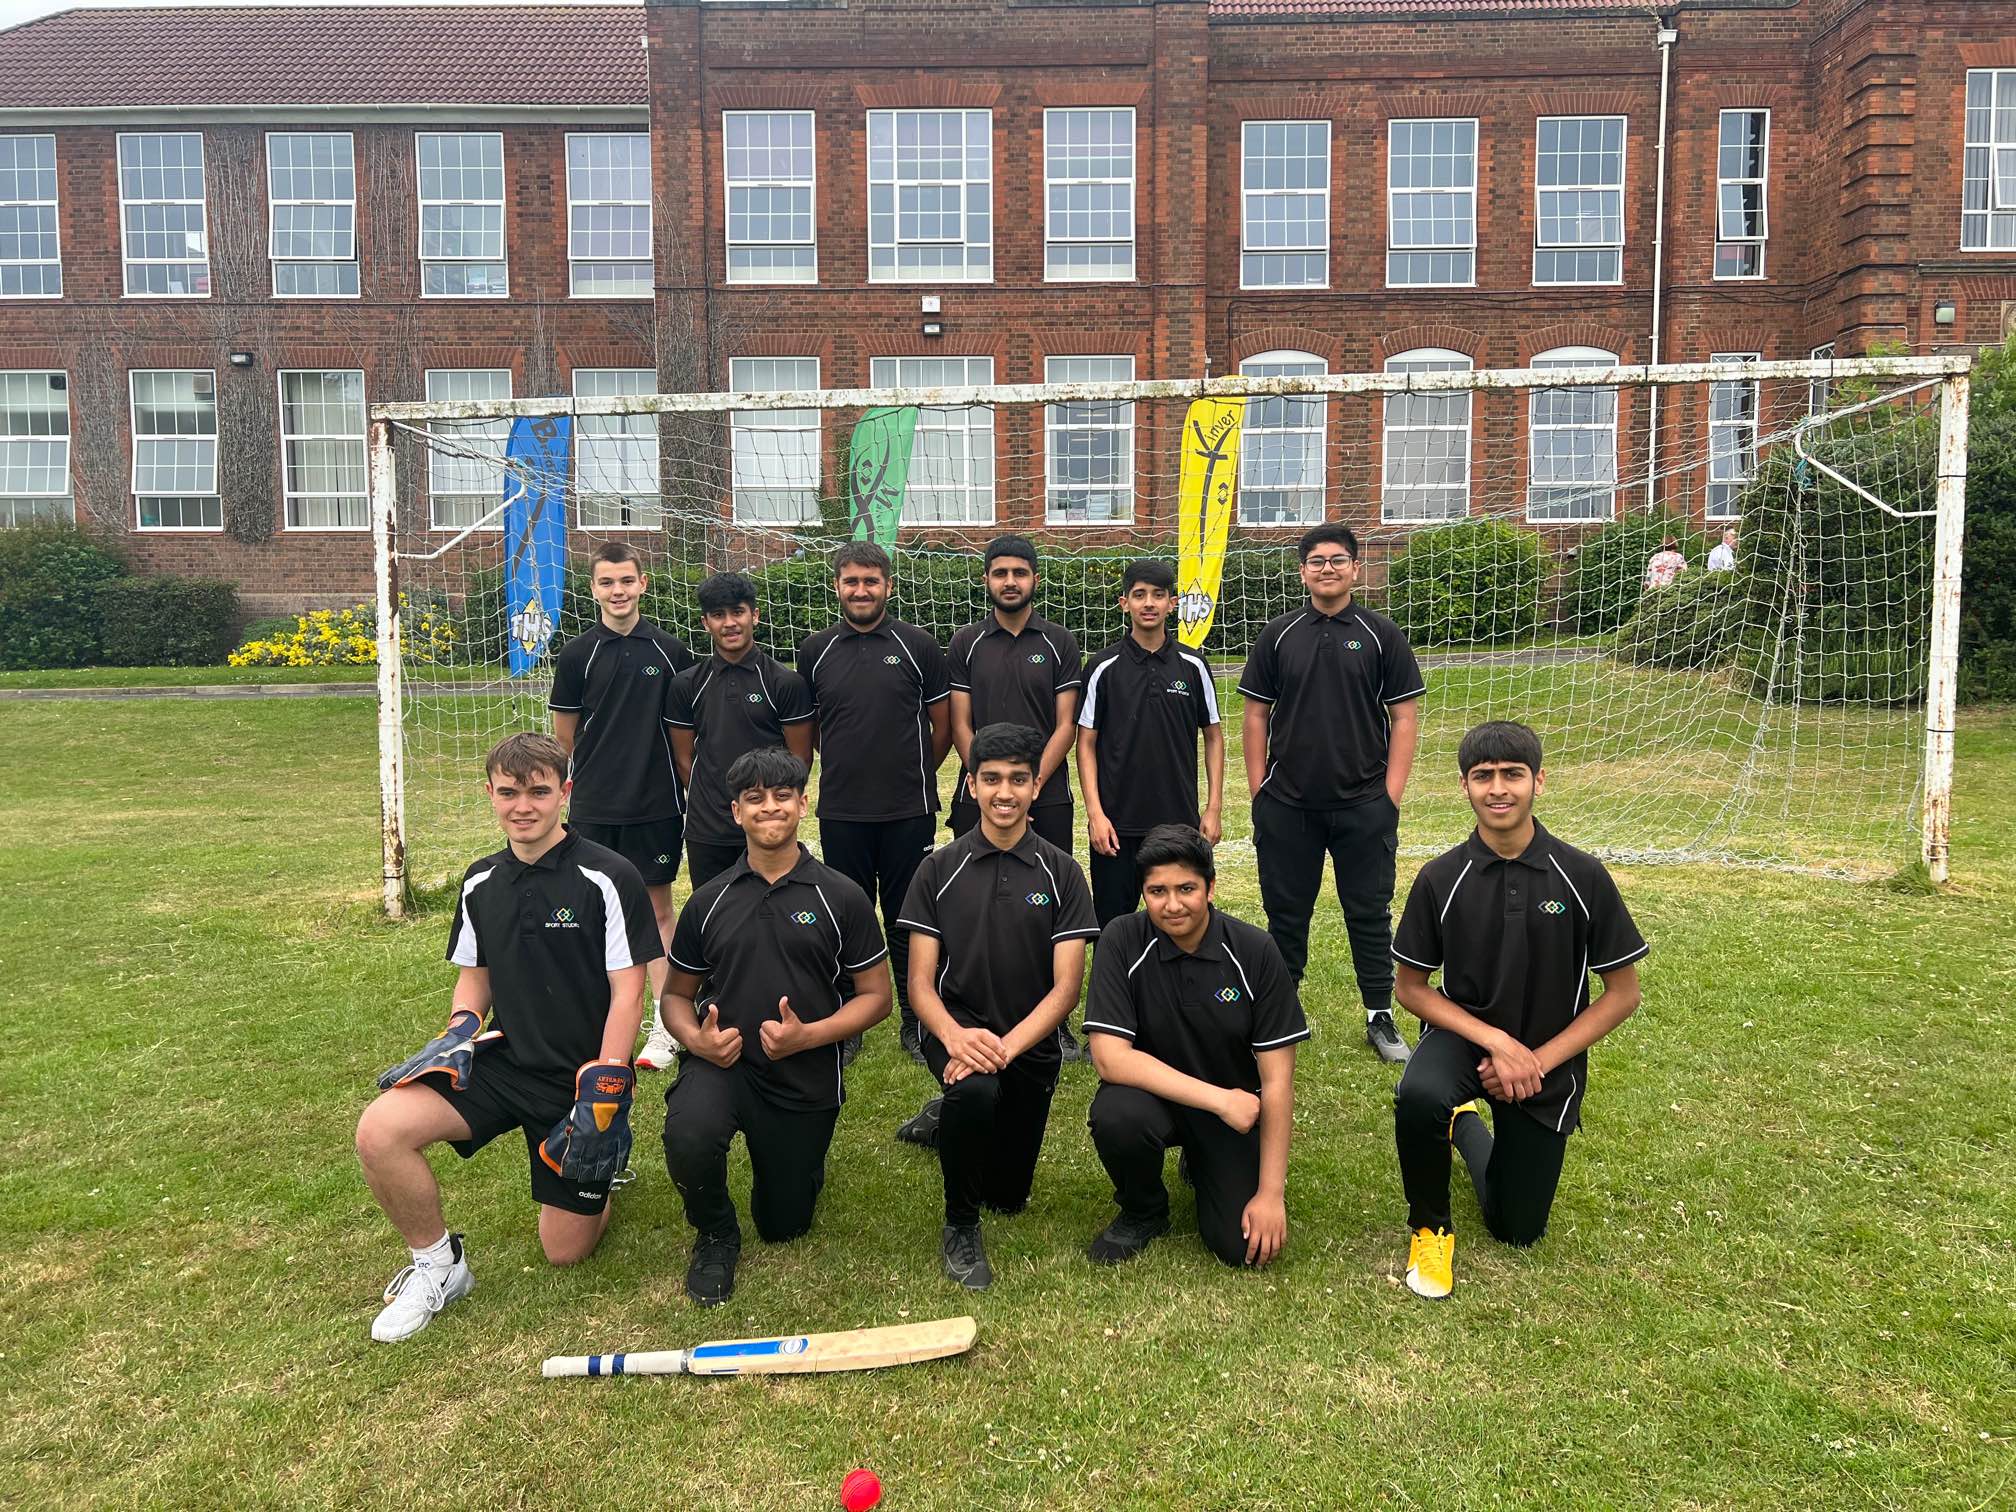 Trinity High School on X: Trinity High School beat Saint Augustine's 130/1  - 105/5 in Trinity's first cricket game on thursday, June 23rd. This was a  first for a number of years.